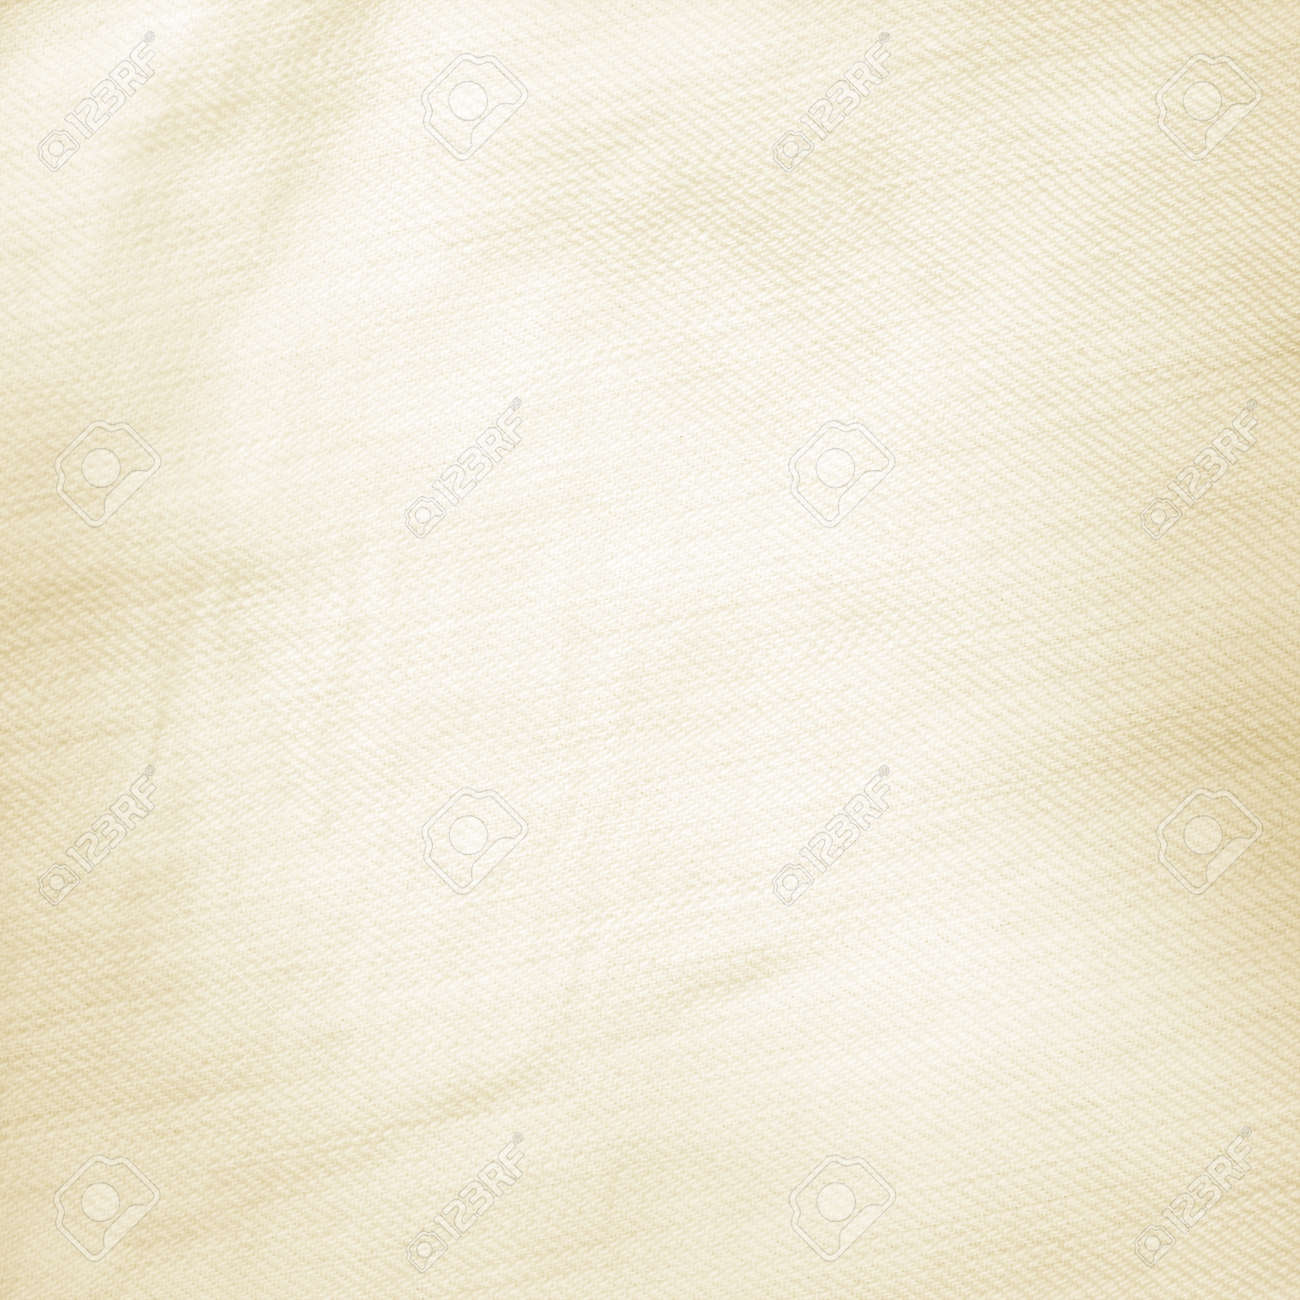 Beige Background Old Paper Texture S Stock Photo